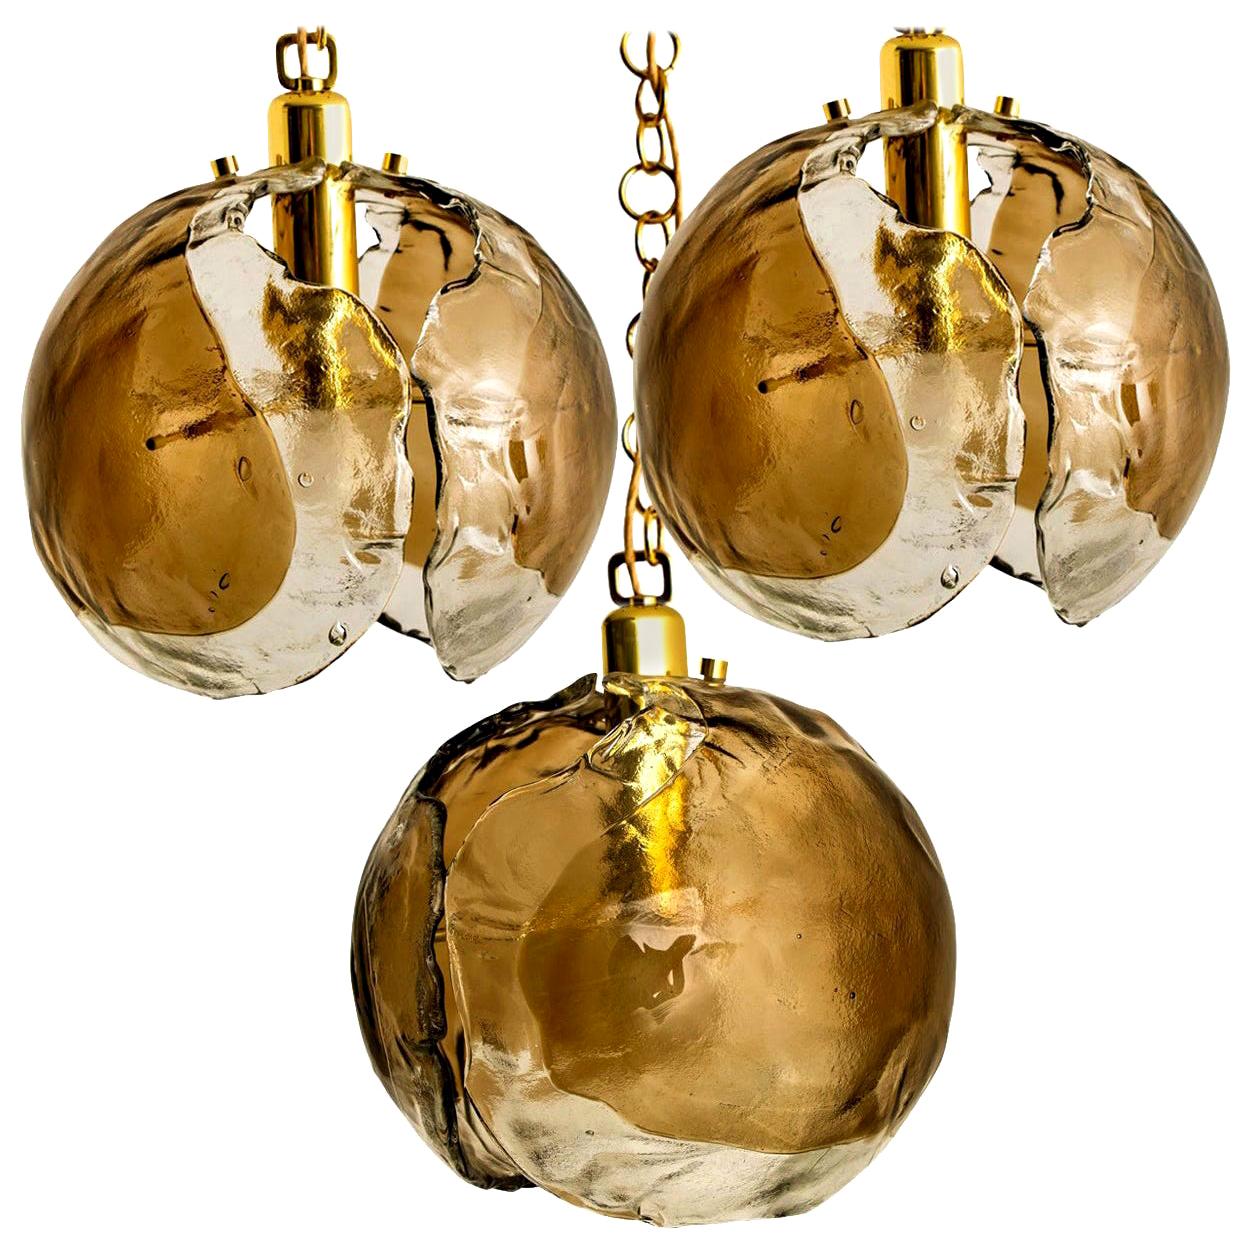 1 of the 3 Kalmar Chandelier Pendant Lights, Smoked Glass and Brass, 1970s For Sale